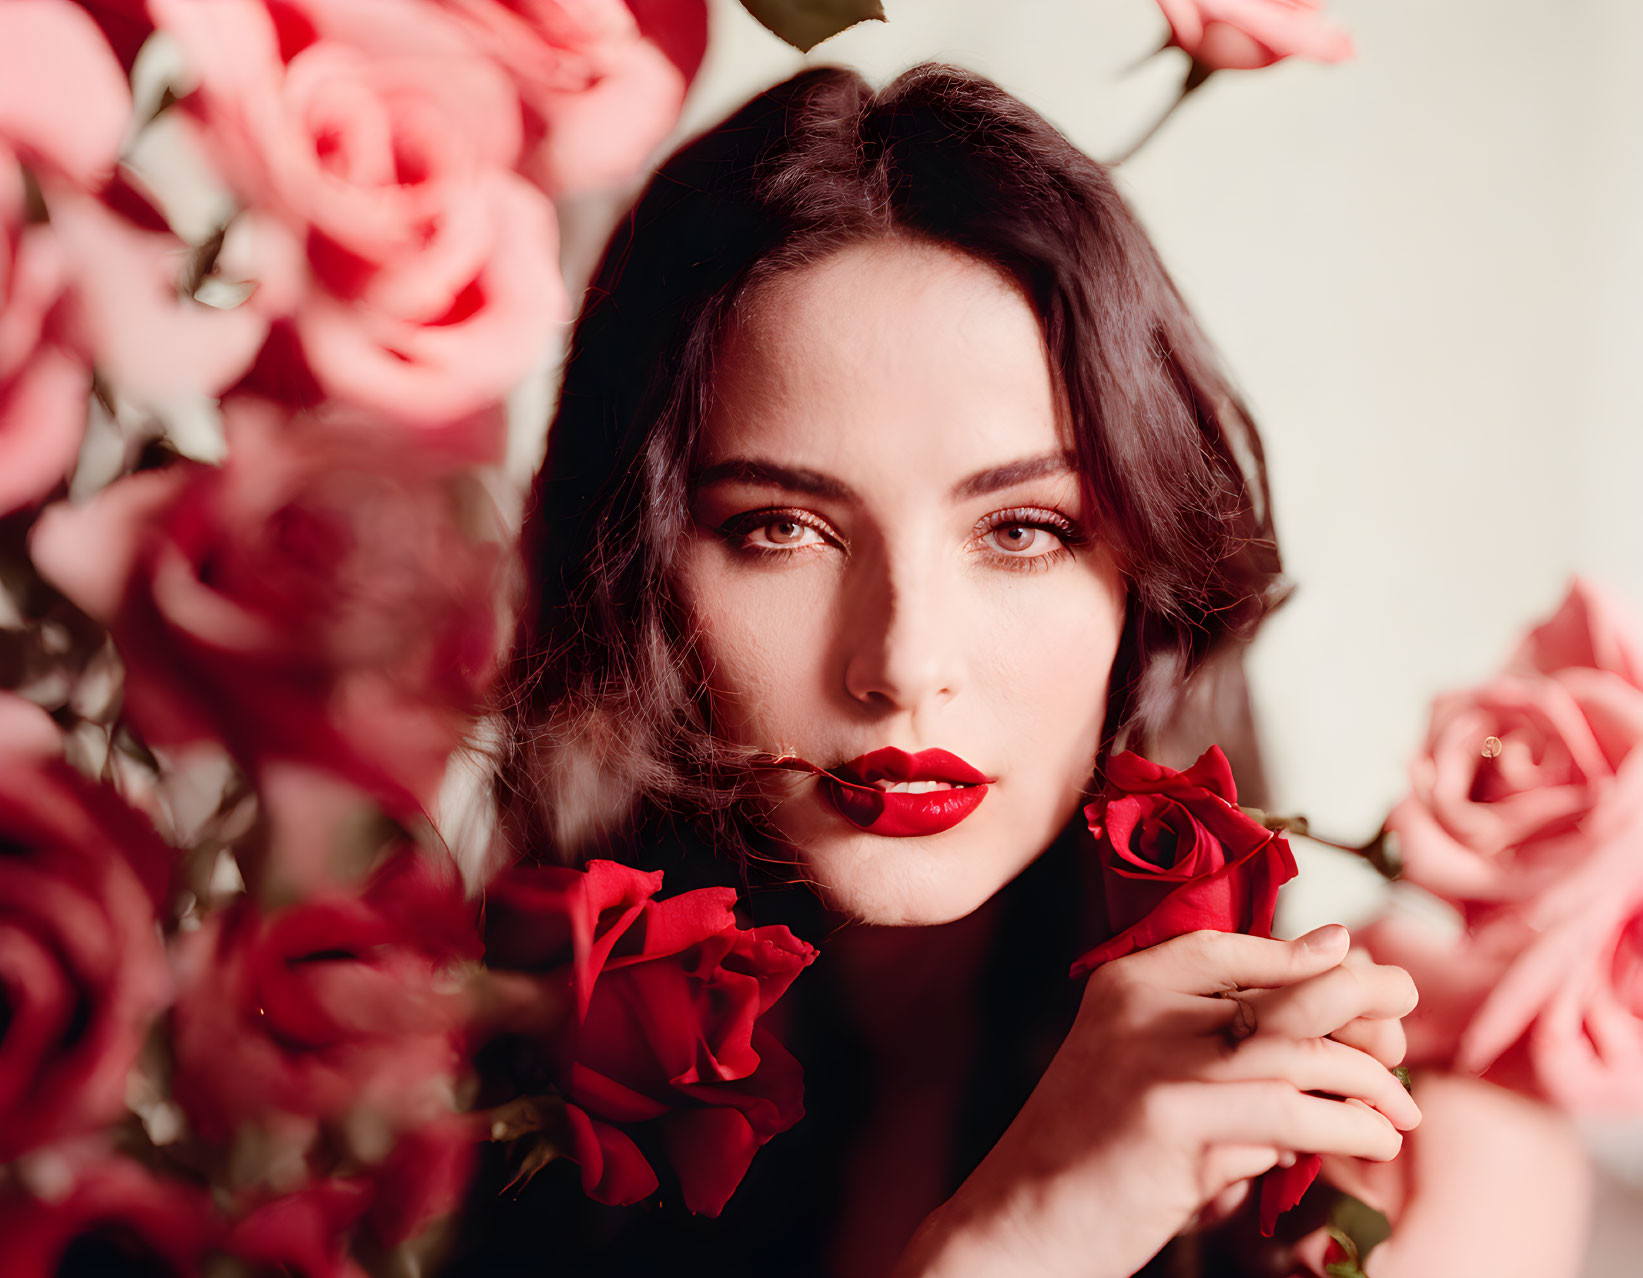 Dark-Haired Woman with Red Lipstick Surrounded by Red Roses